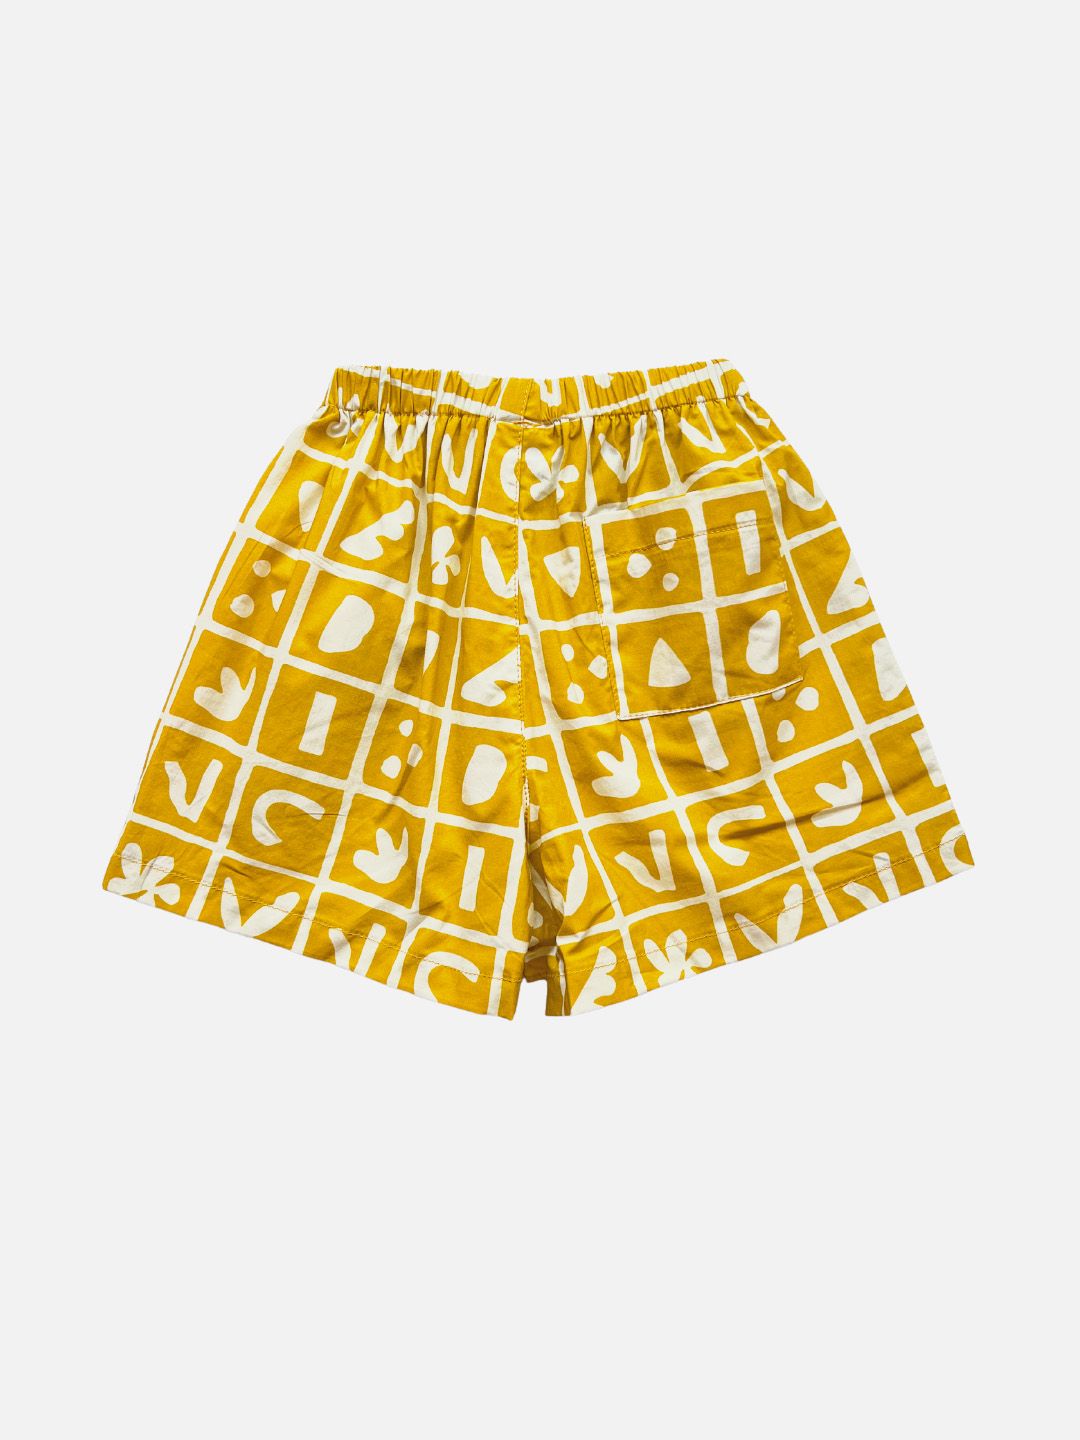 Mustard | A pair of kids' shorts in mustard yellow, overlaid with a grid of different shapes in white, with back pocket, rear view